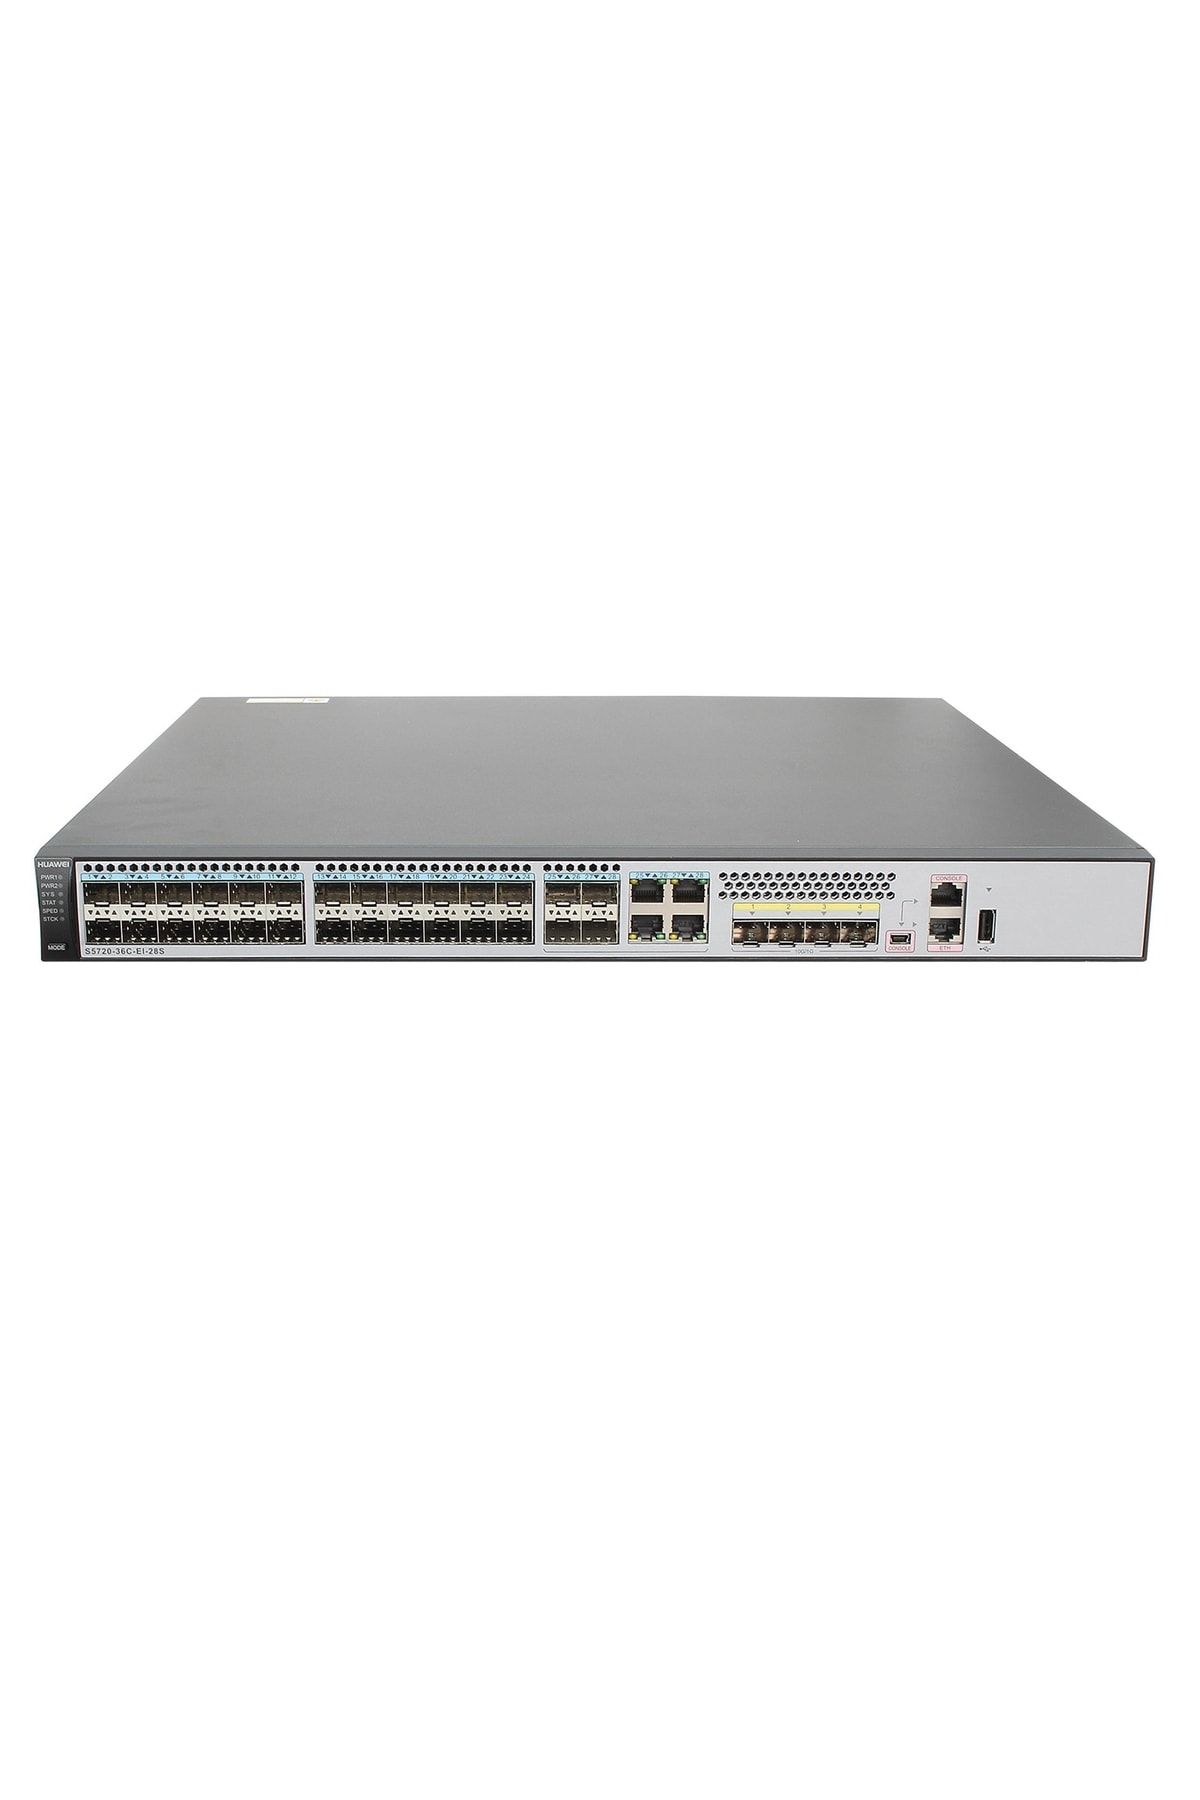 Huawei S5720-36c-eı-28s Layer3 Ethernet Switch(28 Gig Sfp,4 Of Which Are Dual-purpose 10/100/1000 Or